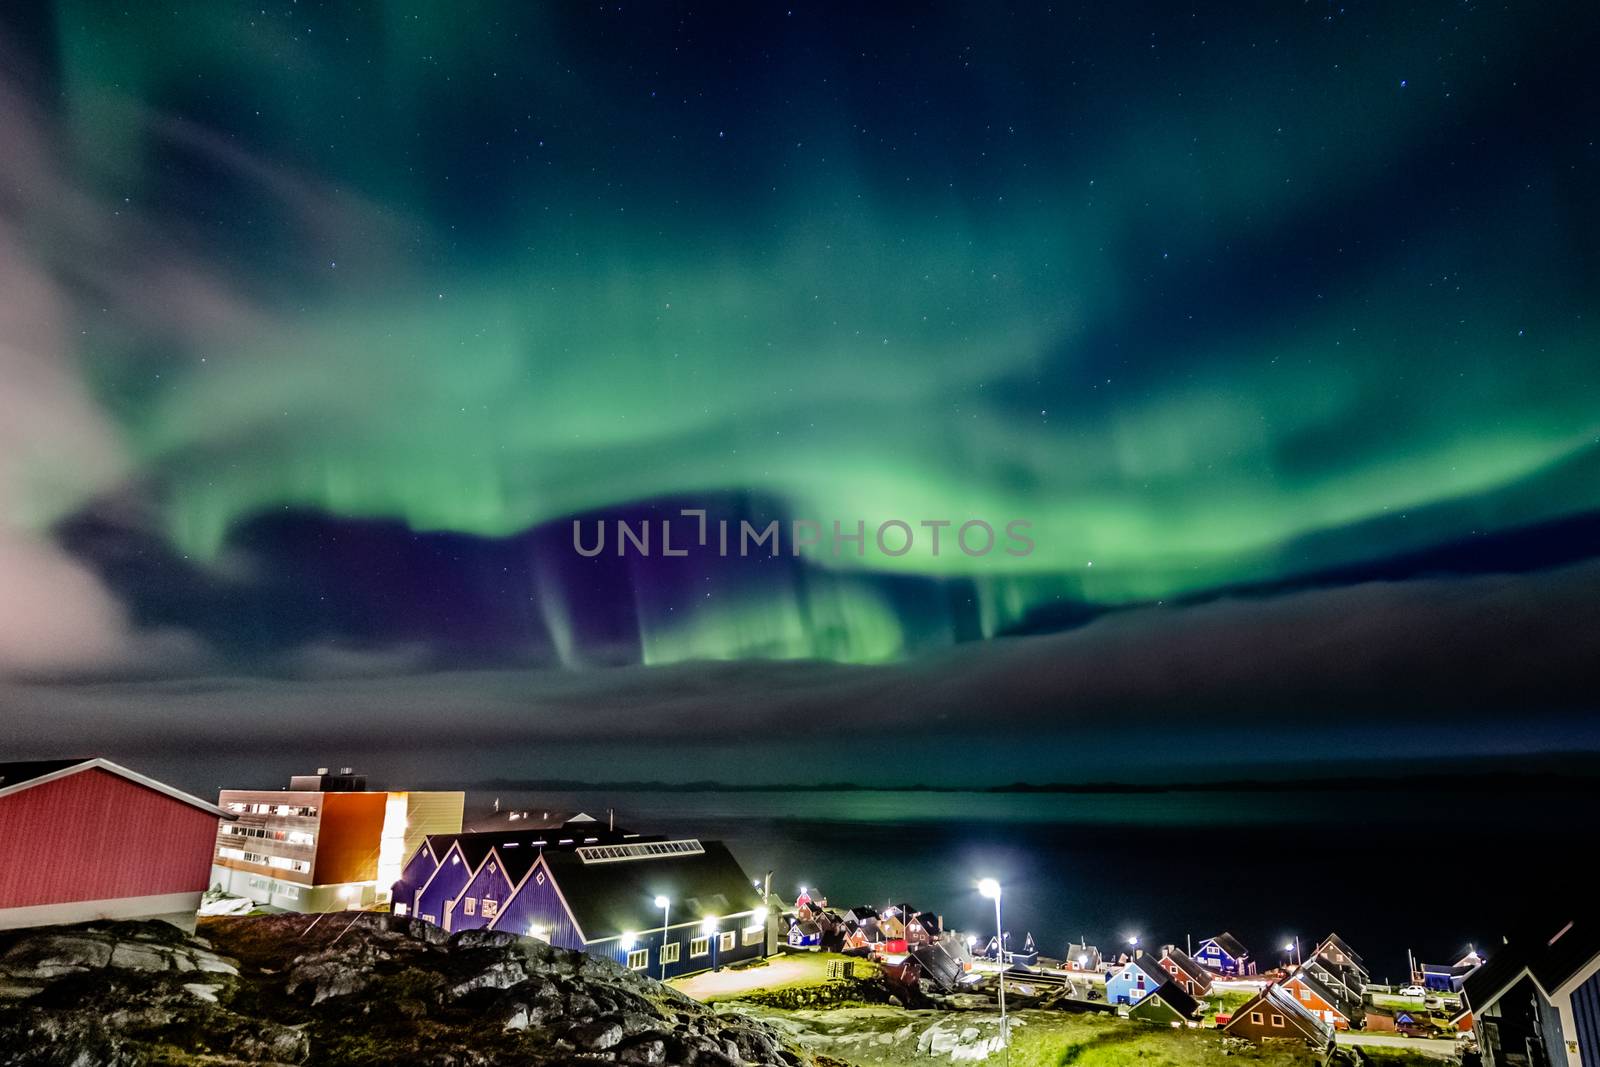 Green bright northern lights hidden by the clouds over the Inuit village at the fjord, Nuuk city, Greenland